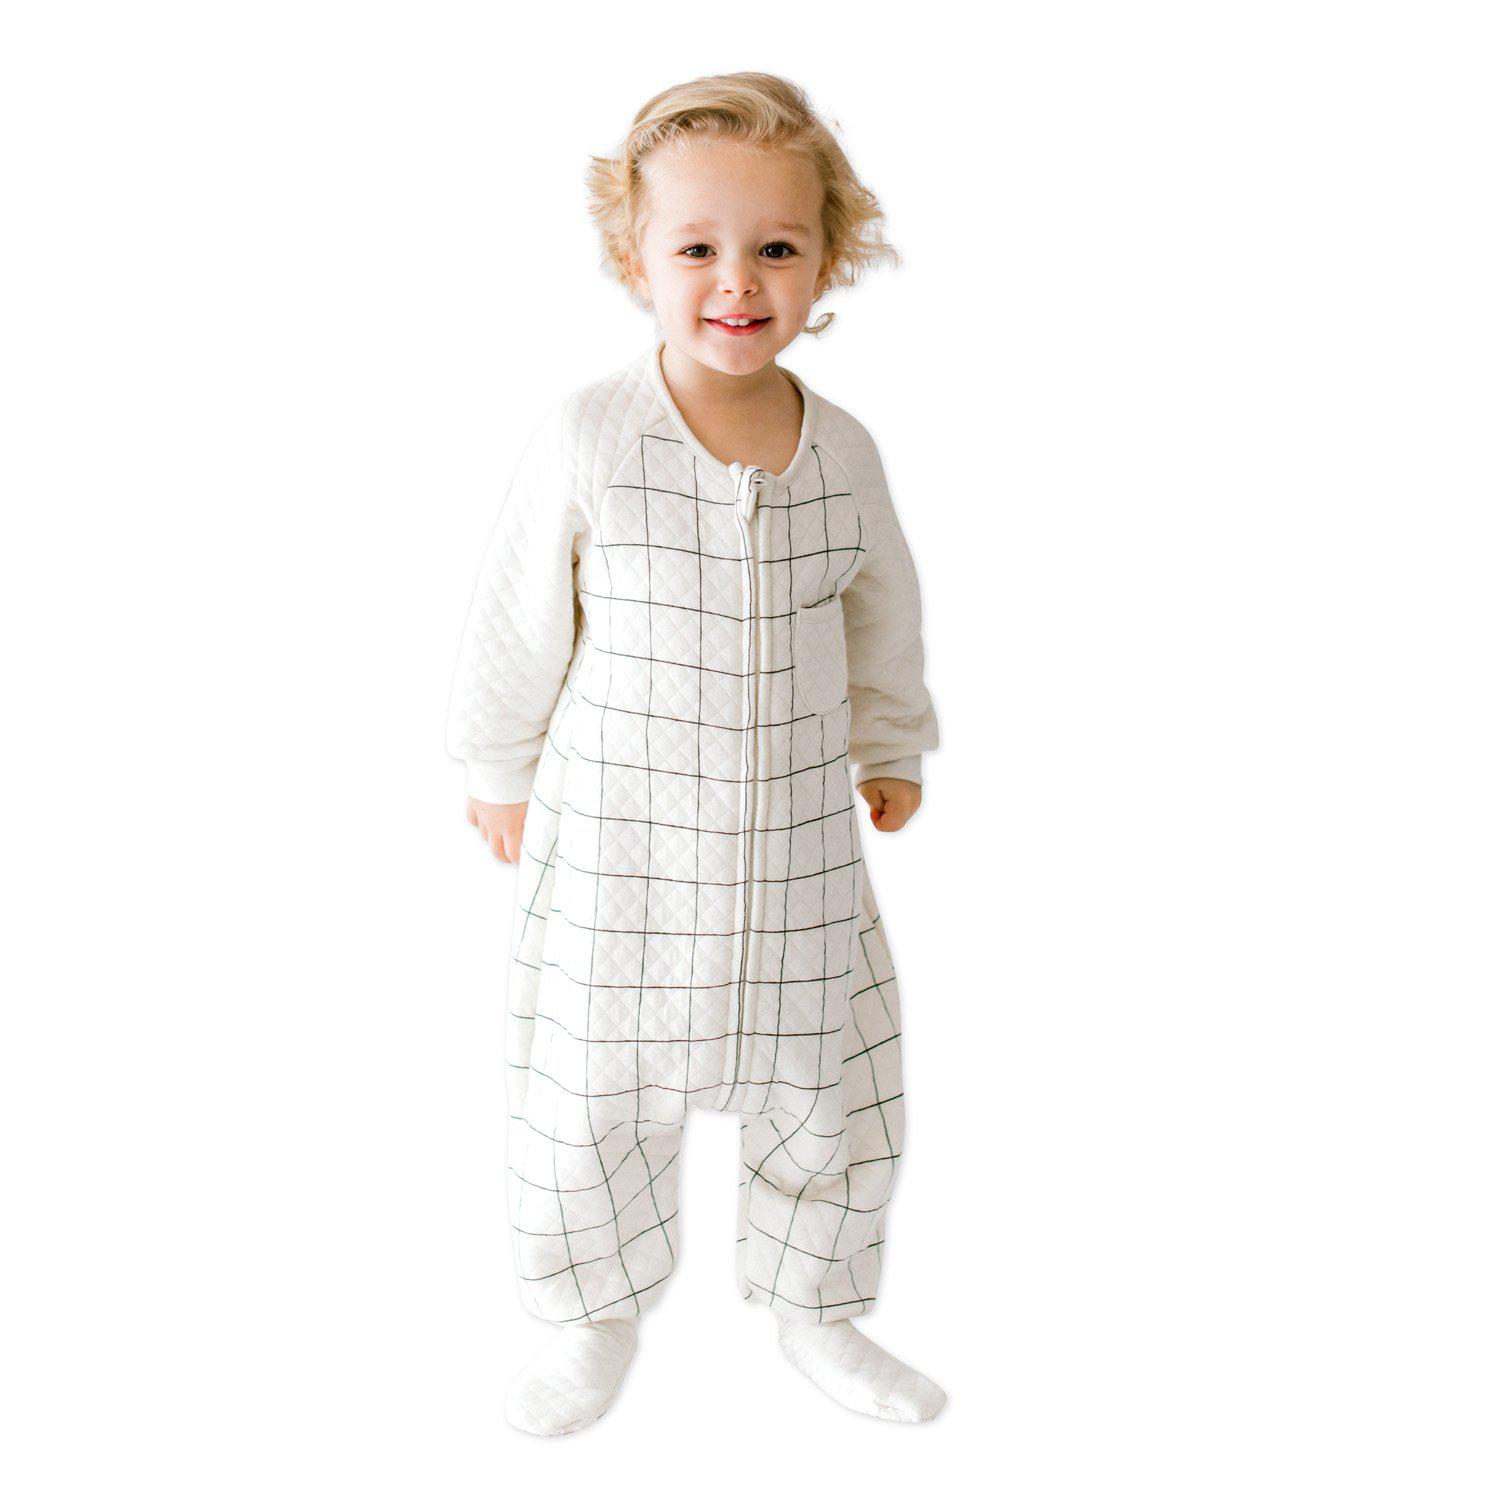 Baby Wearing Tealbee DREAMSIE Checkered- 0.8 TOG Sleep sack with sleeves and footies. Baby Wearing Tealbee DREAMSIE Sunshine 1.2 TOG Sleep sack with sleeves and footies. Available from 12m to 4T.